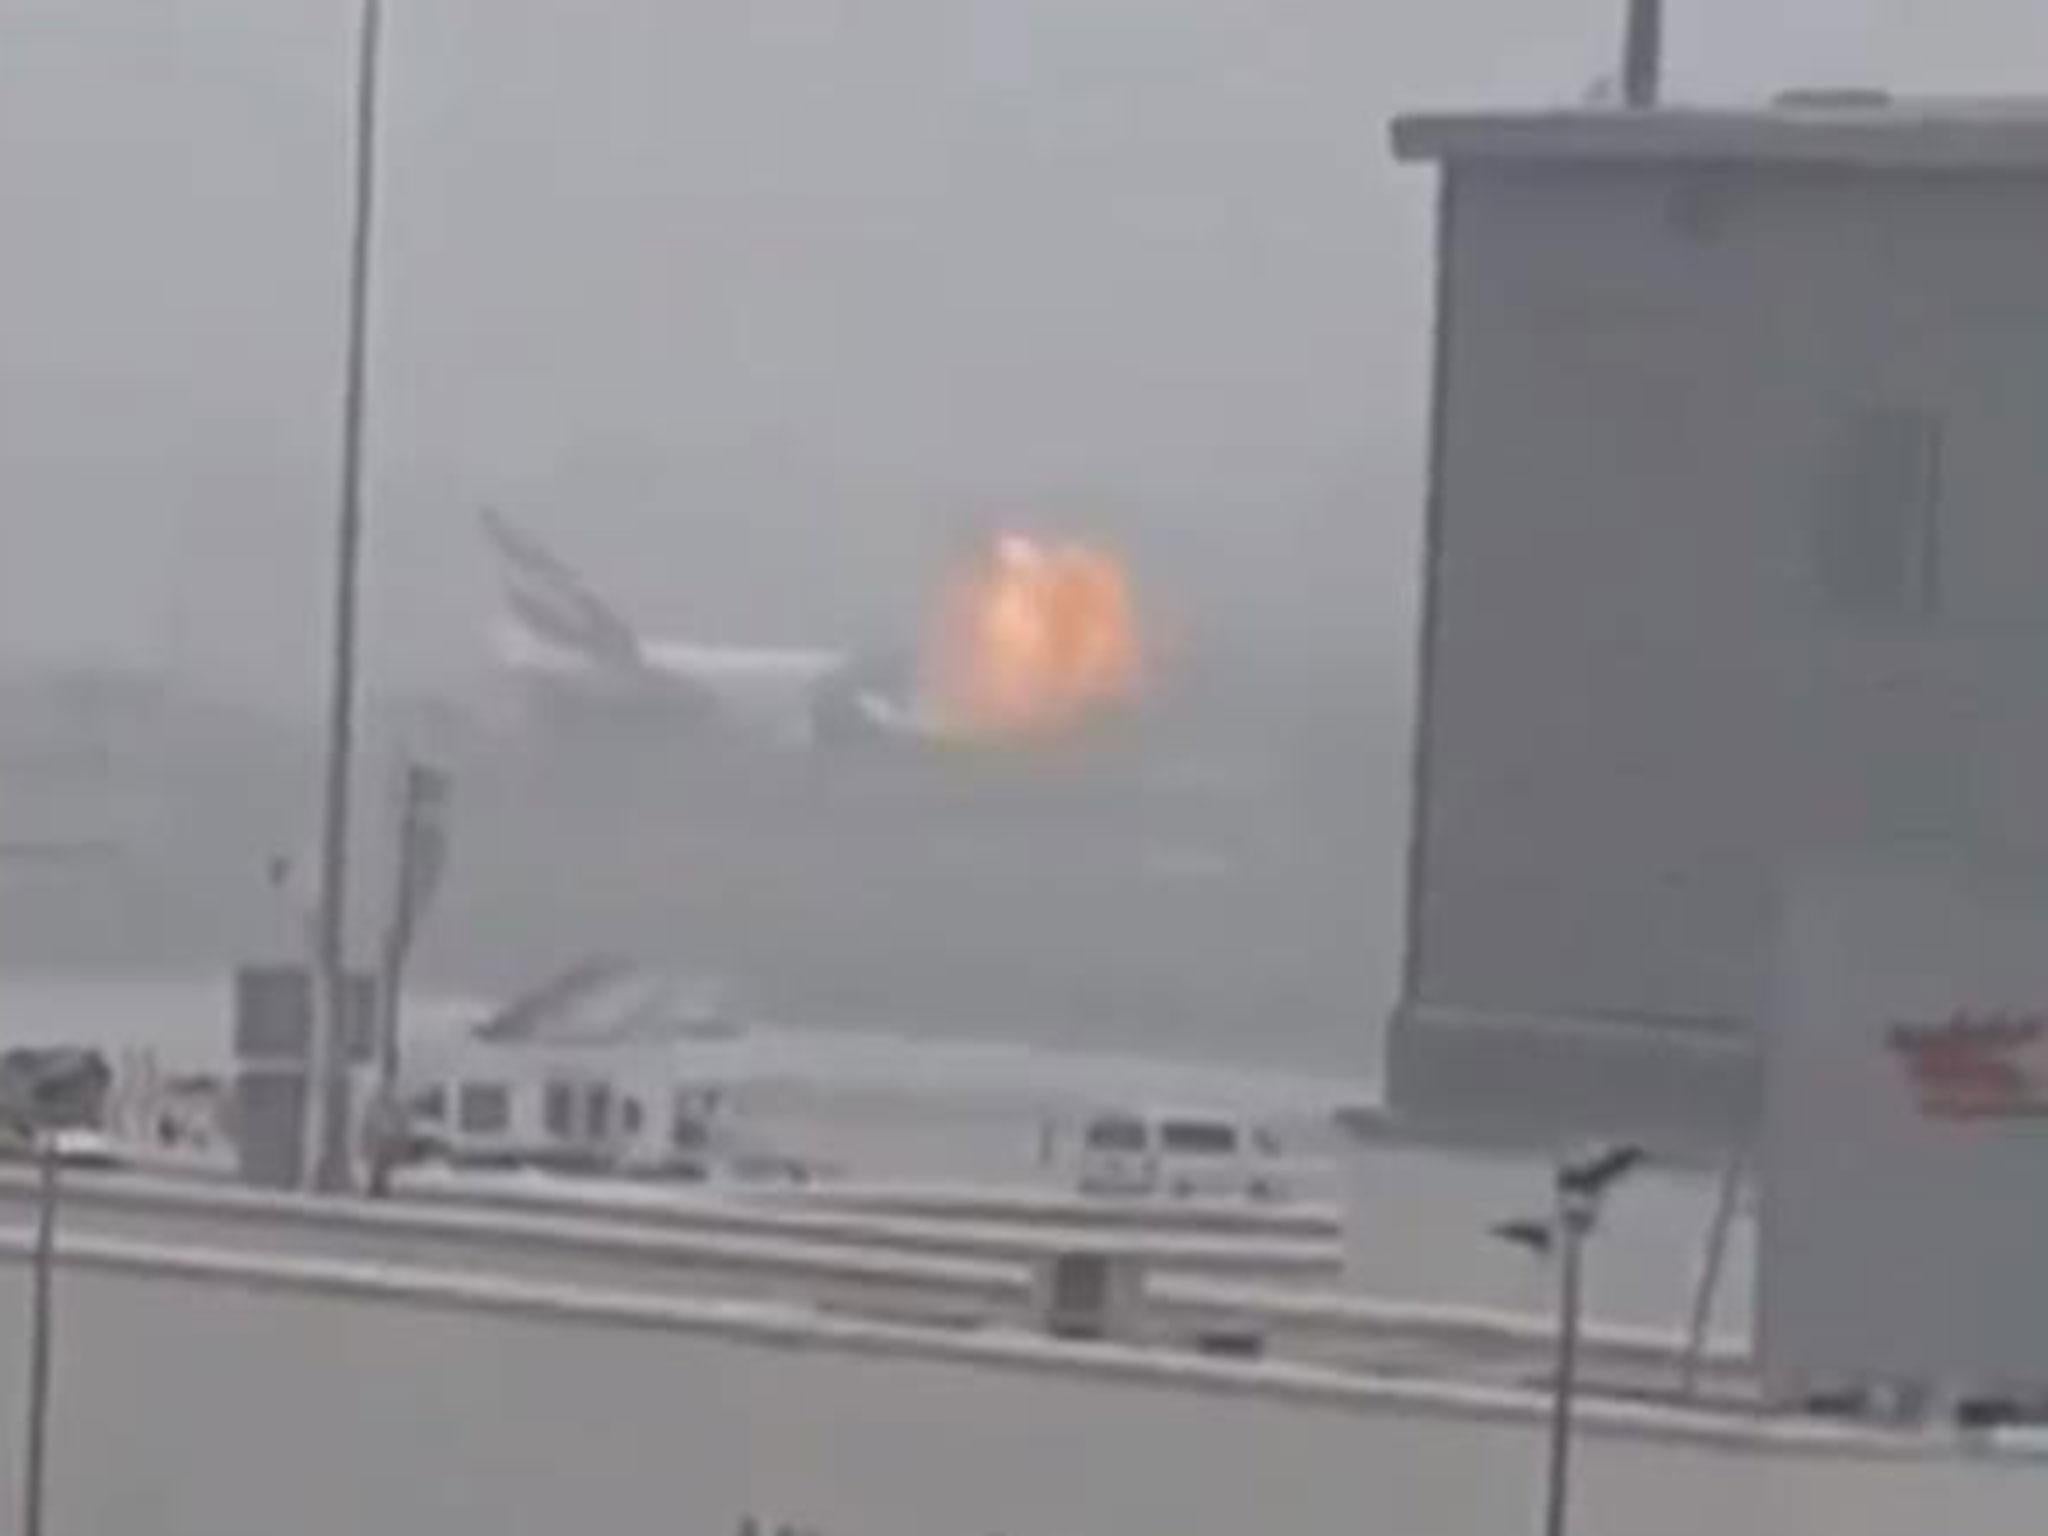 Footage showed a fireball bursting from the plane after it crash landed at Dubai International Airport